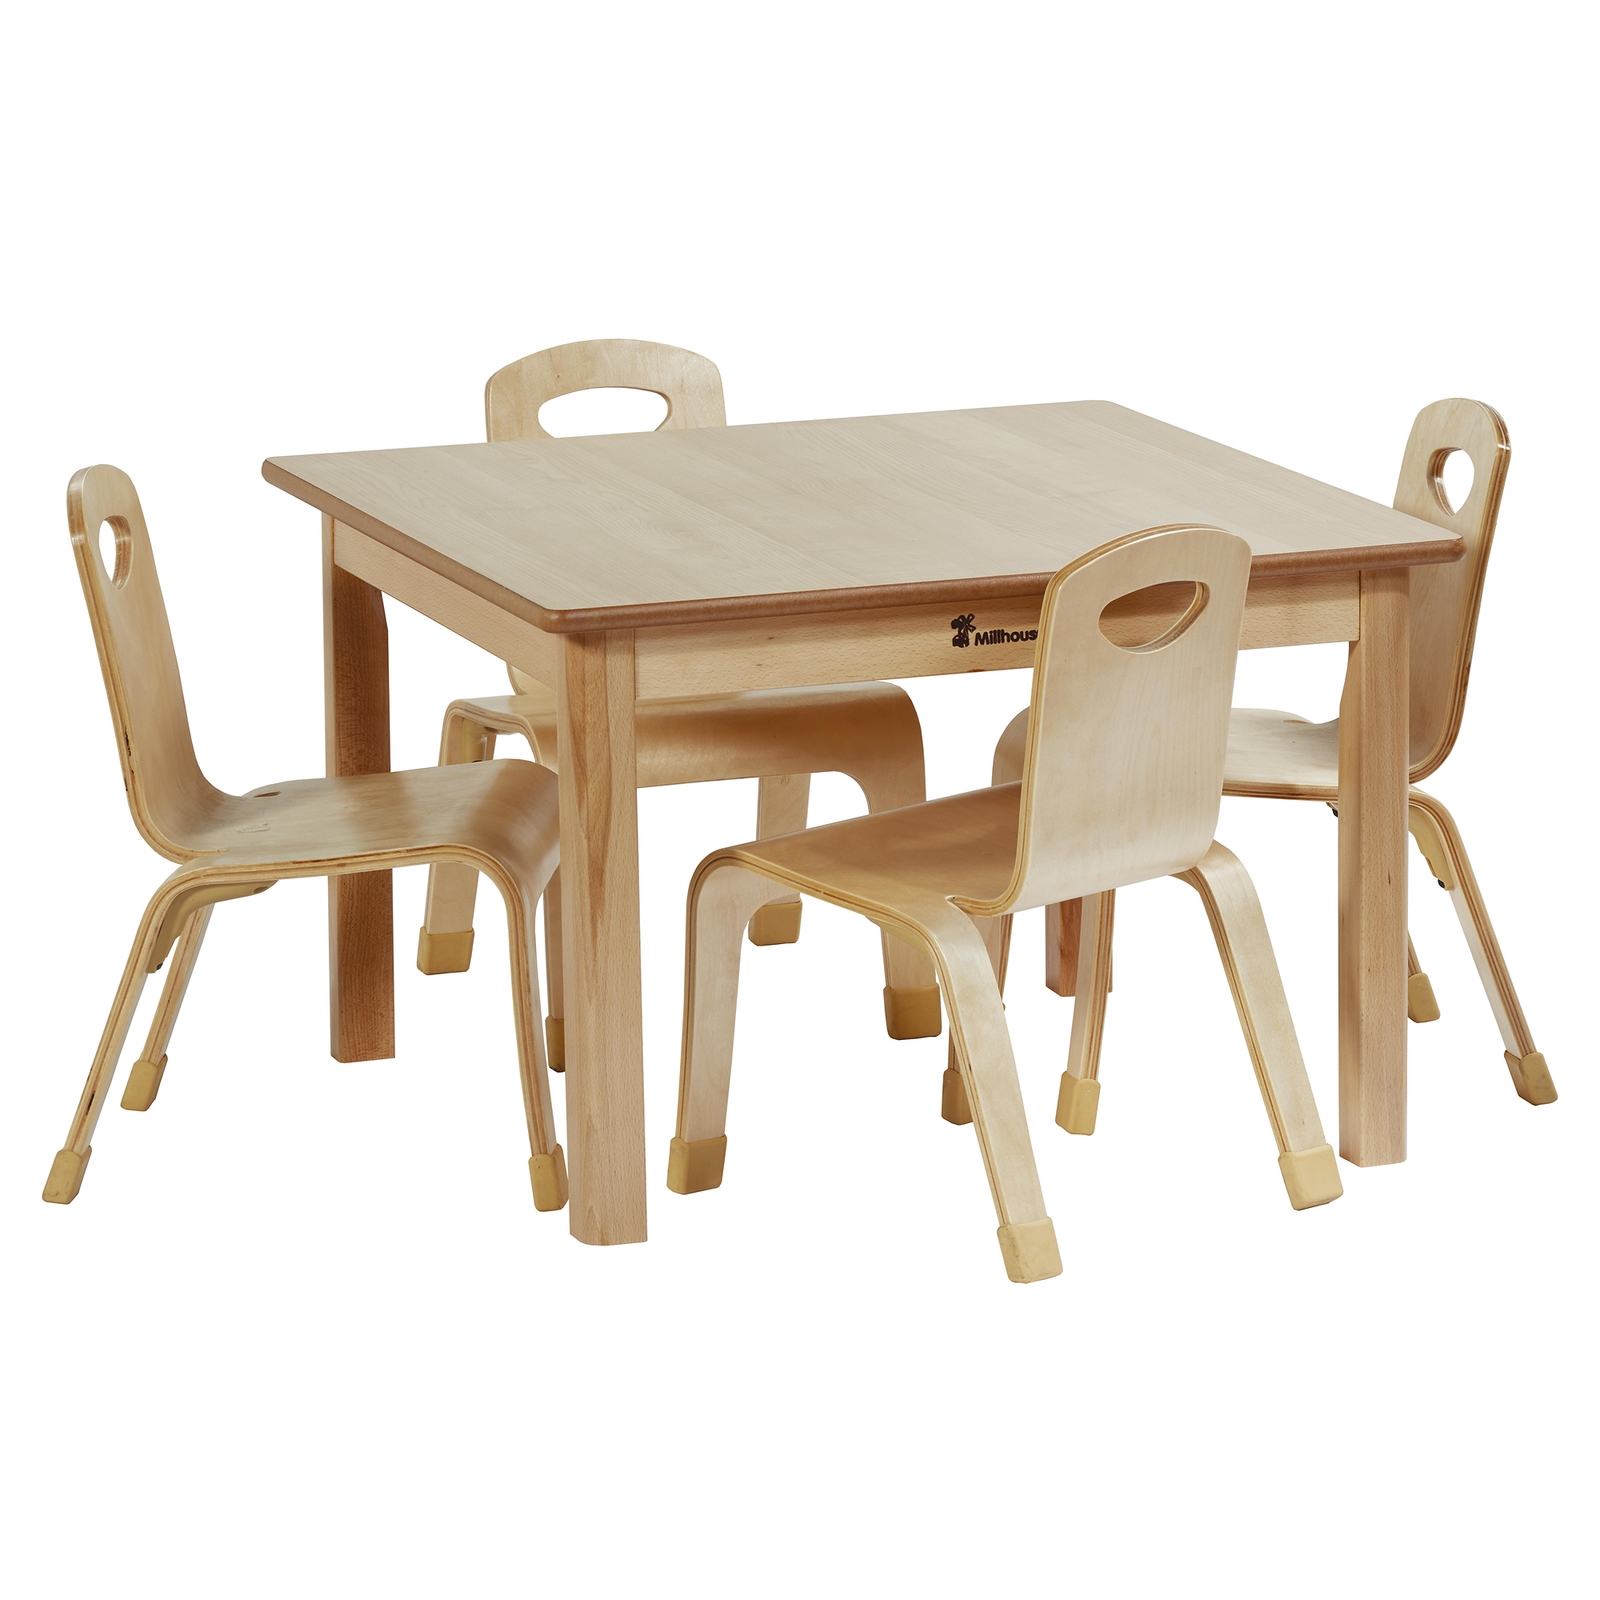 Playscapes Square Table H32cm 4 Chairs H21cm